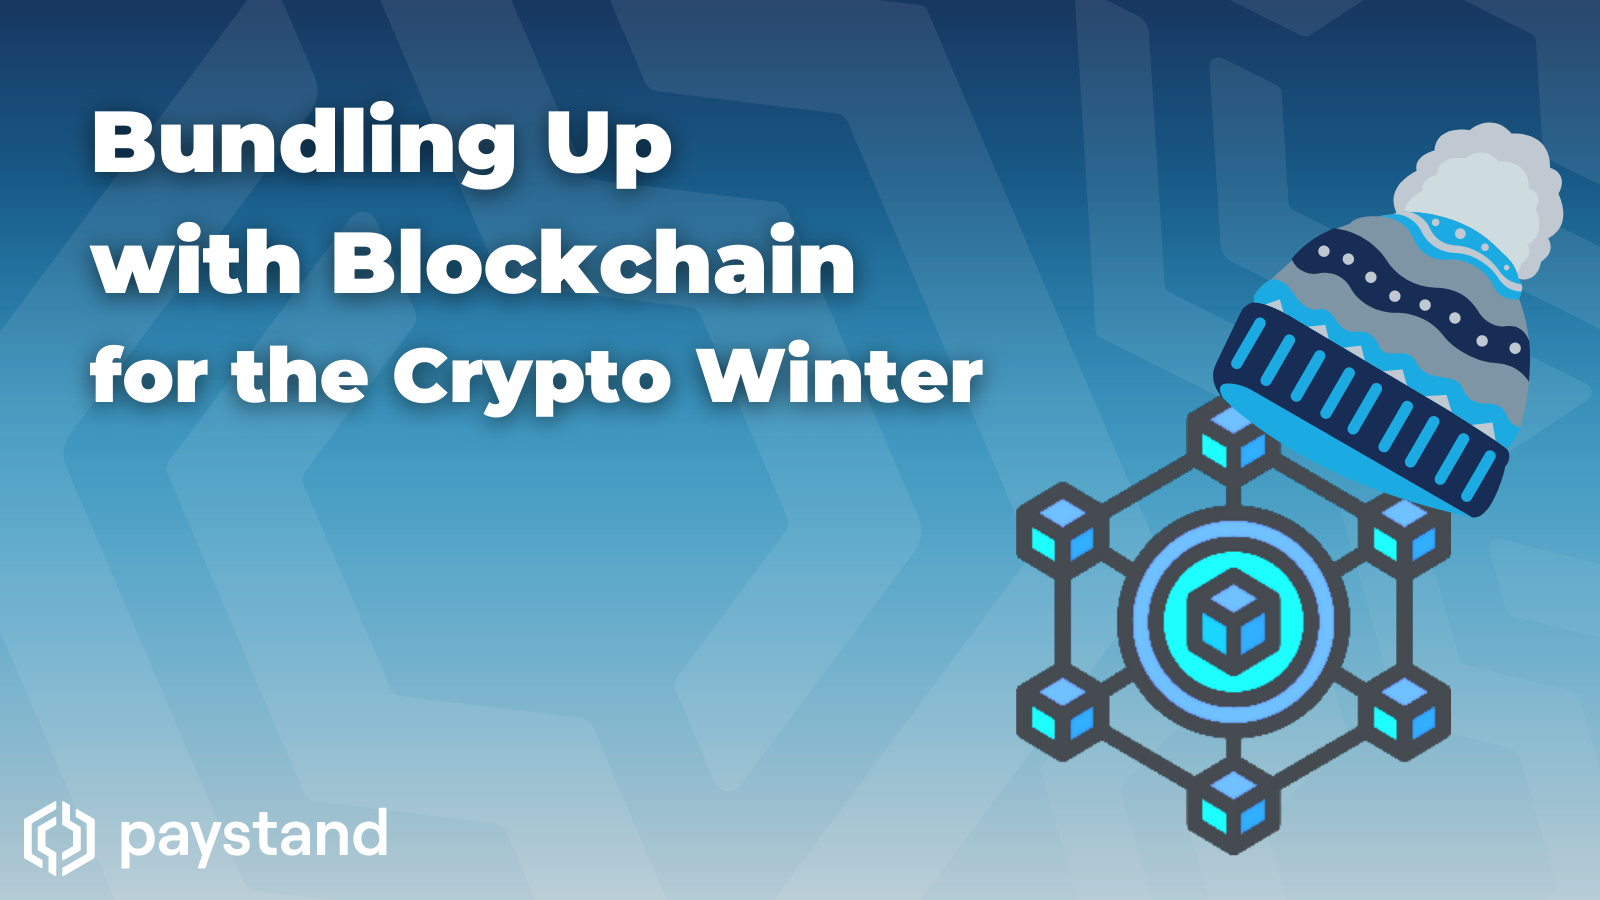 Bundling up with Blockchain for the Crypto Winter